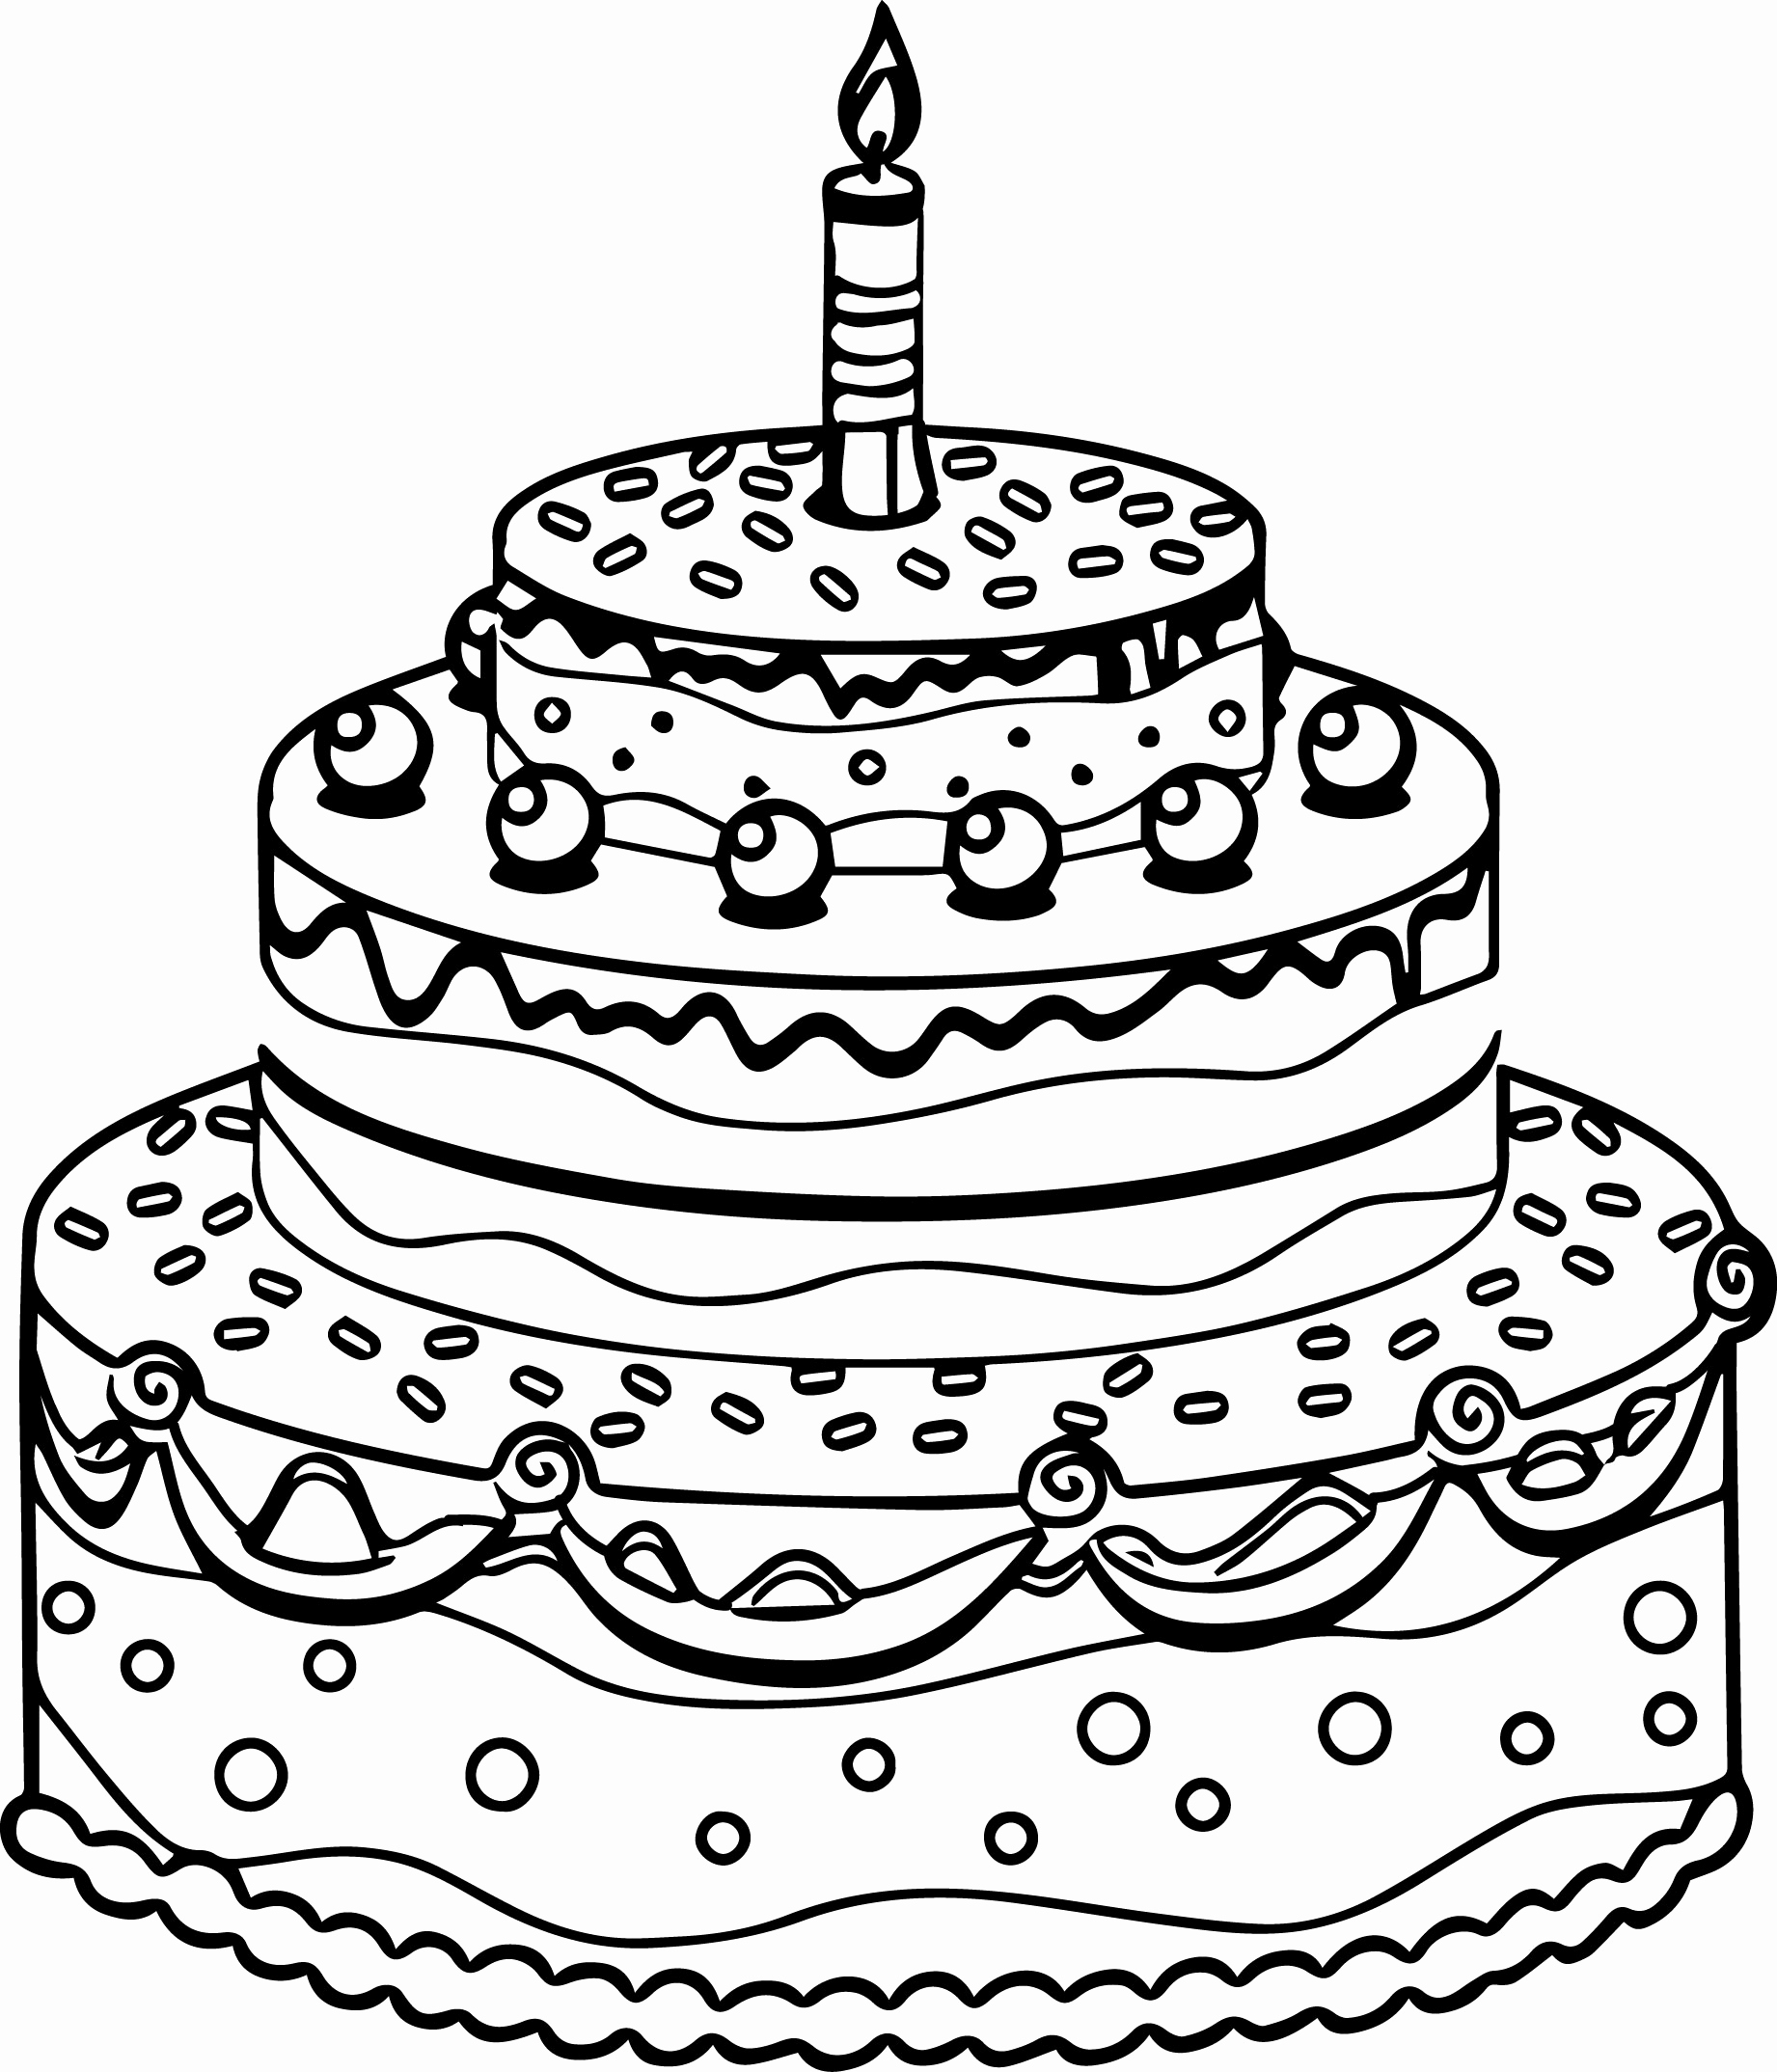 Birthday Cake Coloring Page at GetColorings.com | Free ...